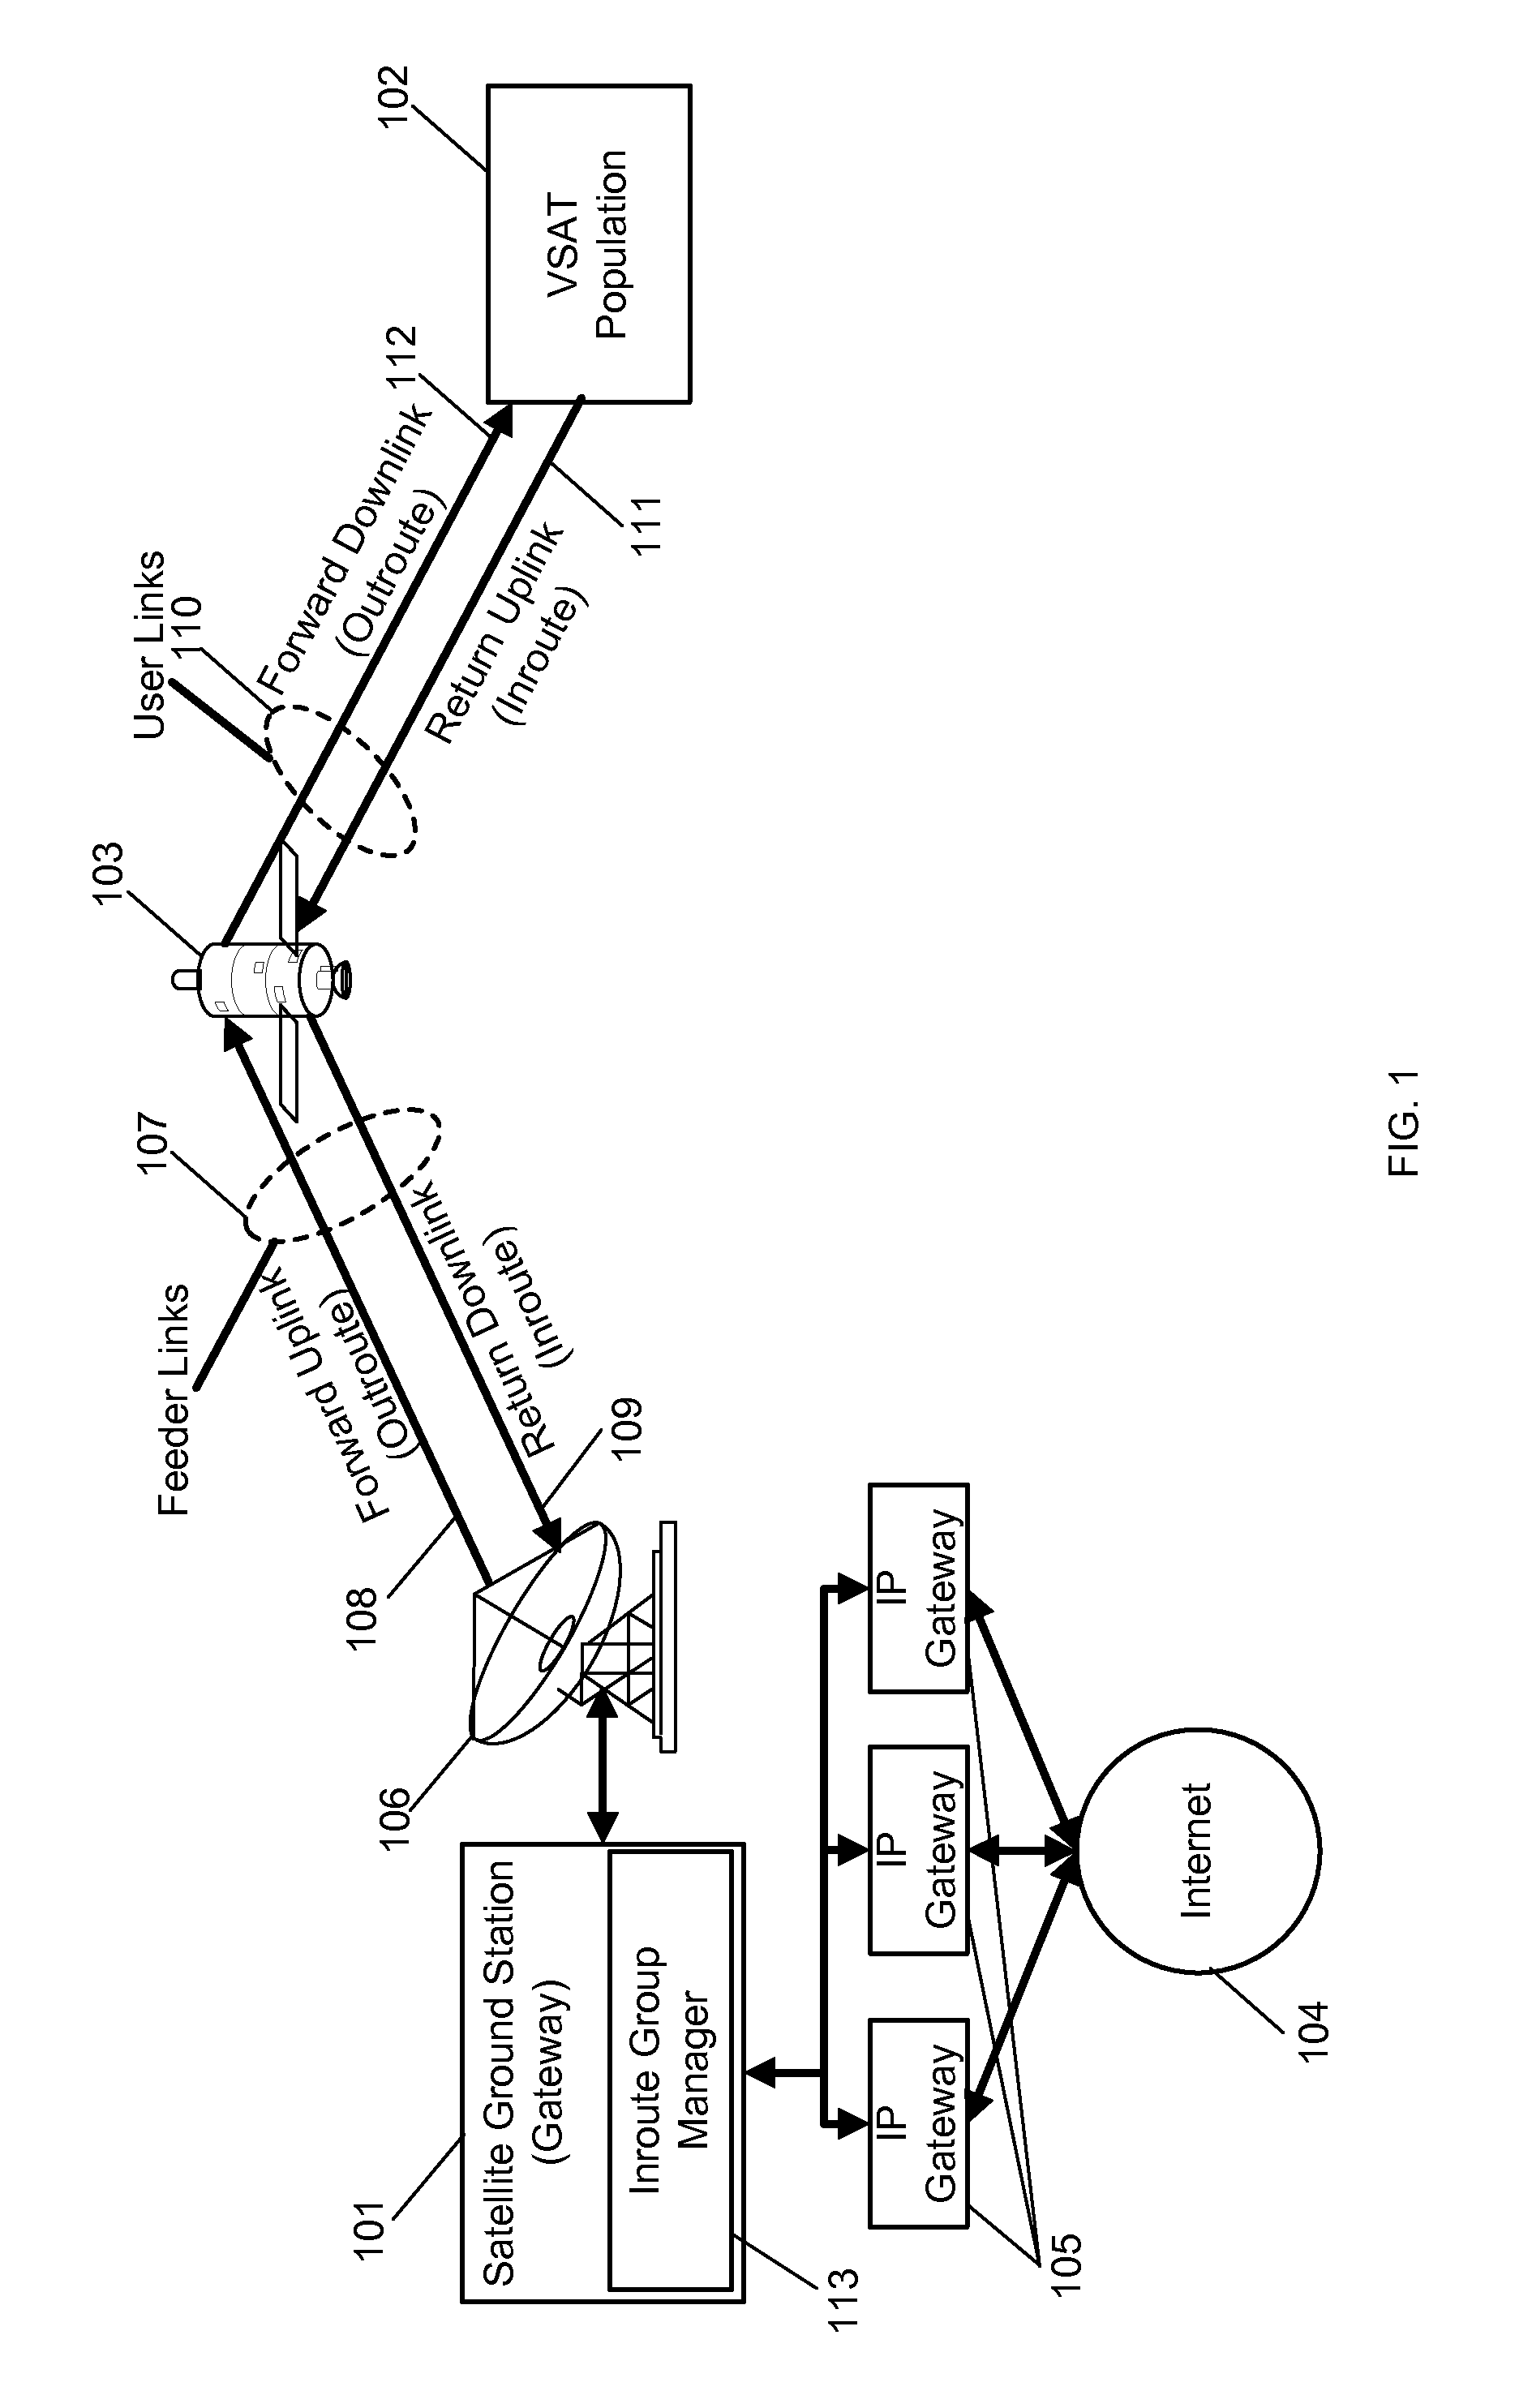 Method and system for inroute bandwidth allocation supporting multiple traffic priorities in a satellite network